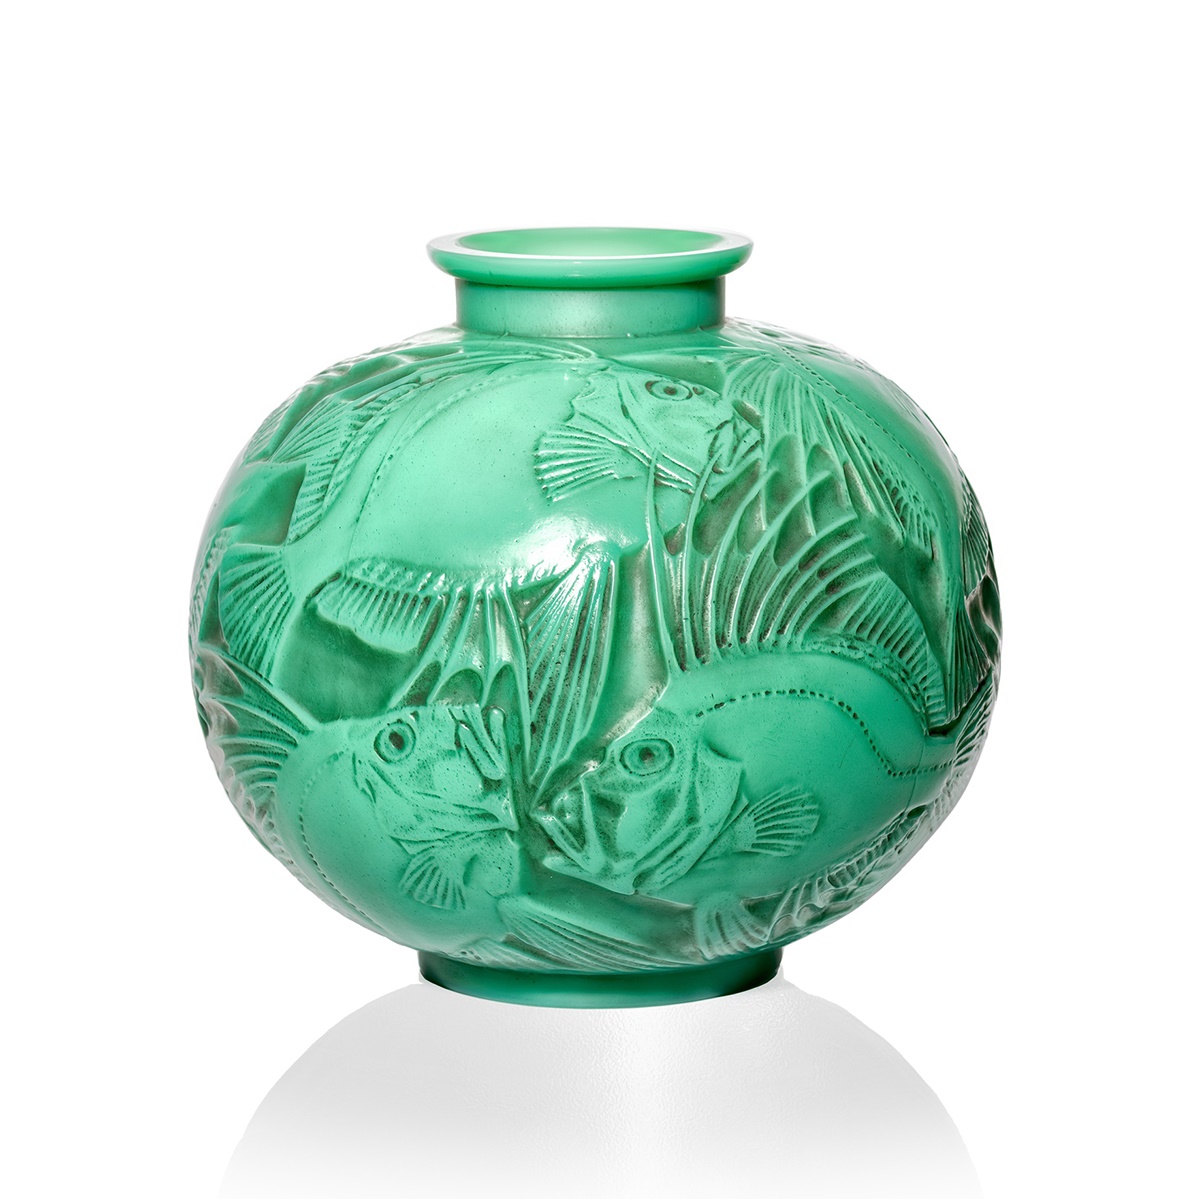 RENÉ LALIQUE (FRENCH 1860-1945) | POISSONS VASE, NO. 925 | Sold for £25,200 + fees